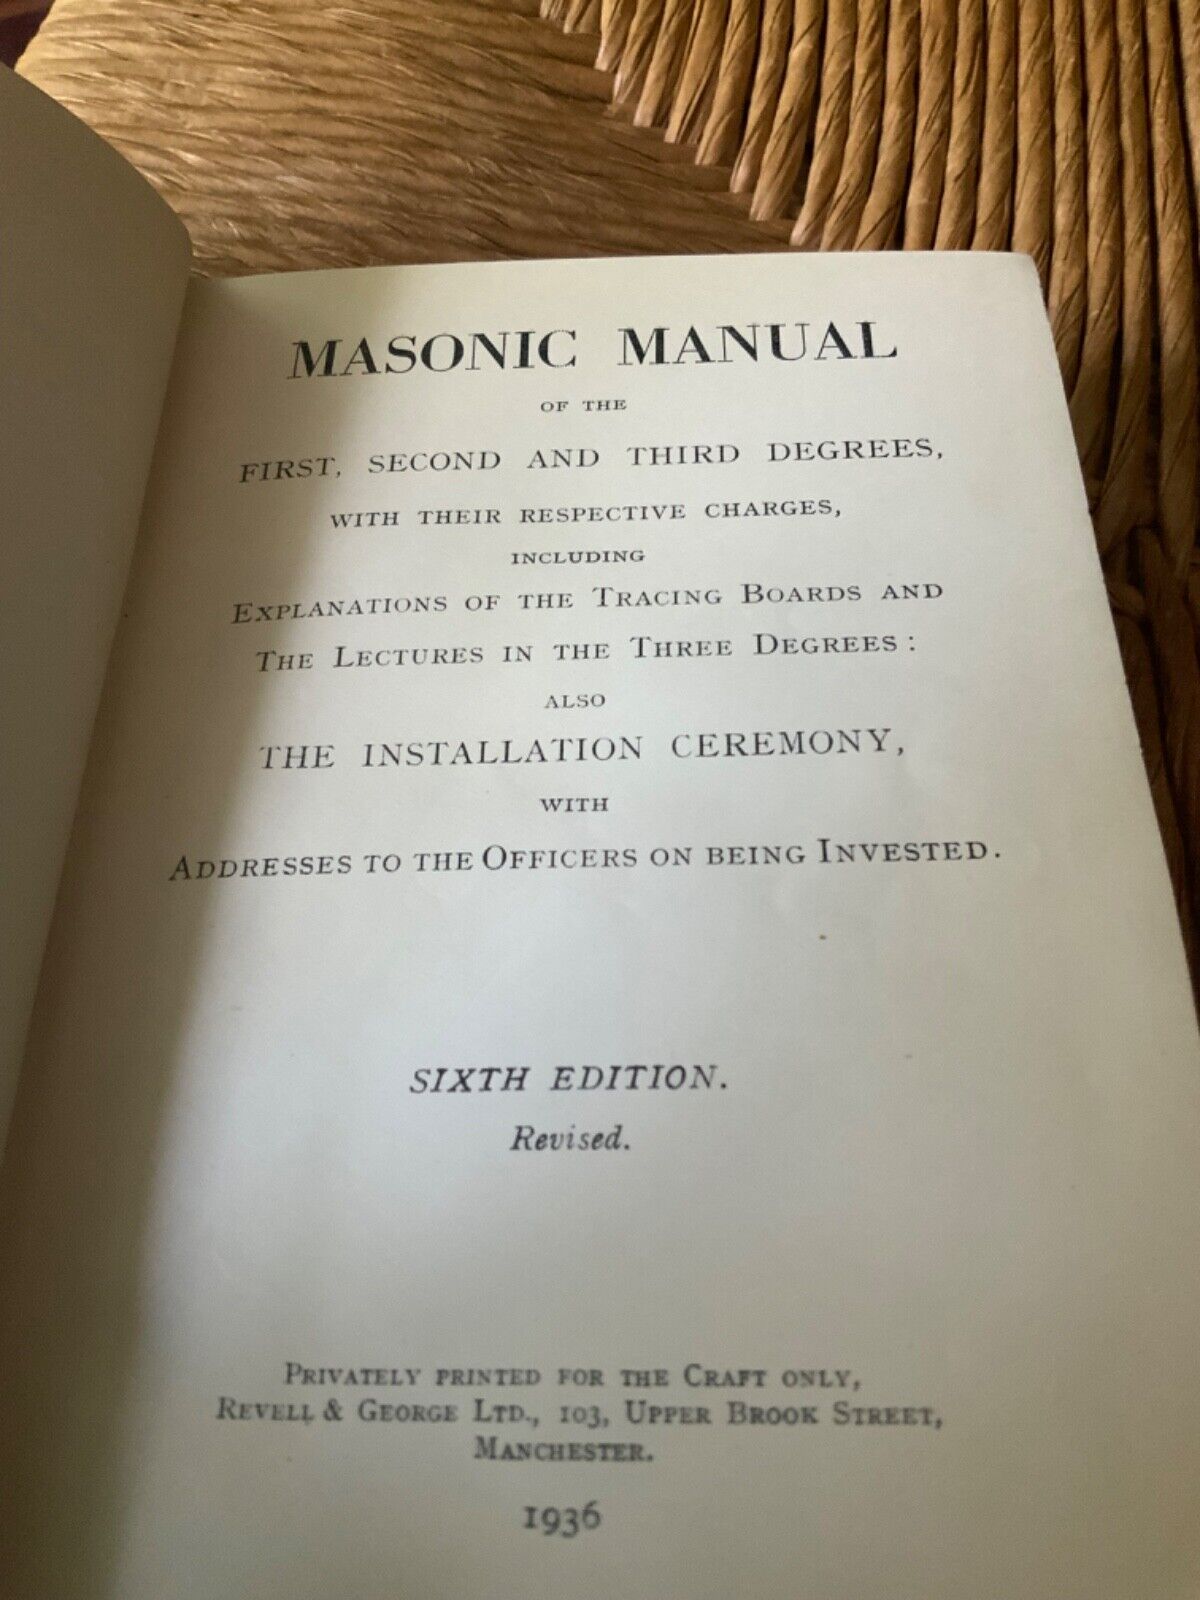 Masonic Manual of The First, Second, and Third Degrees